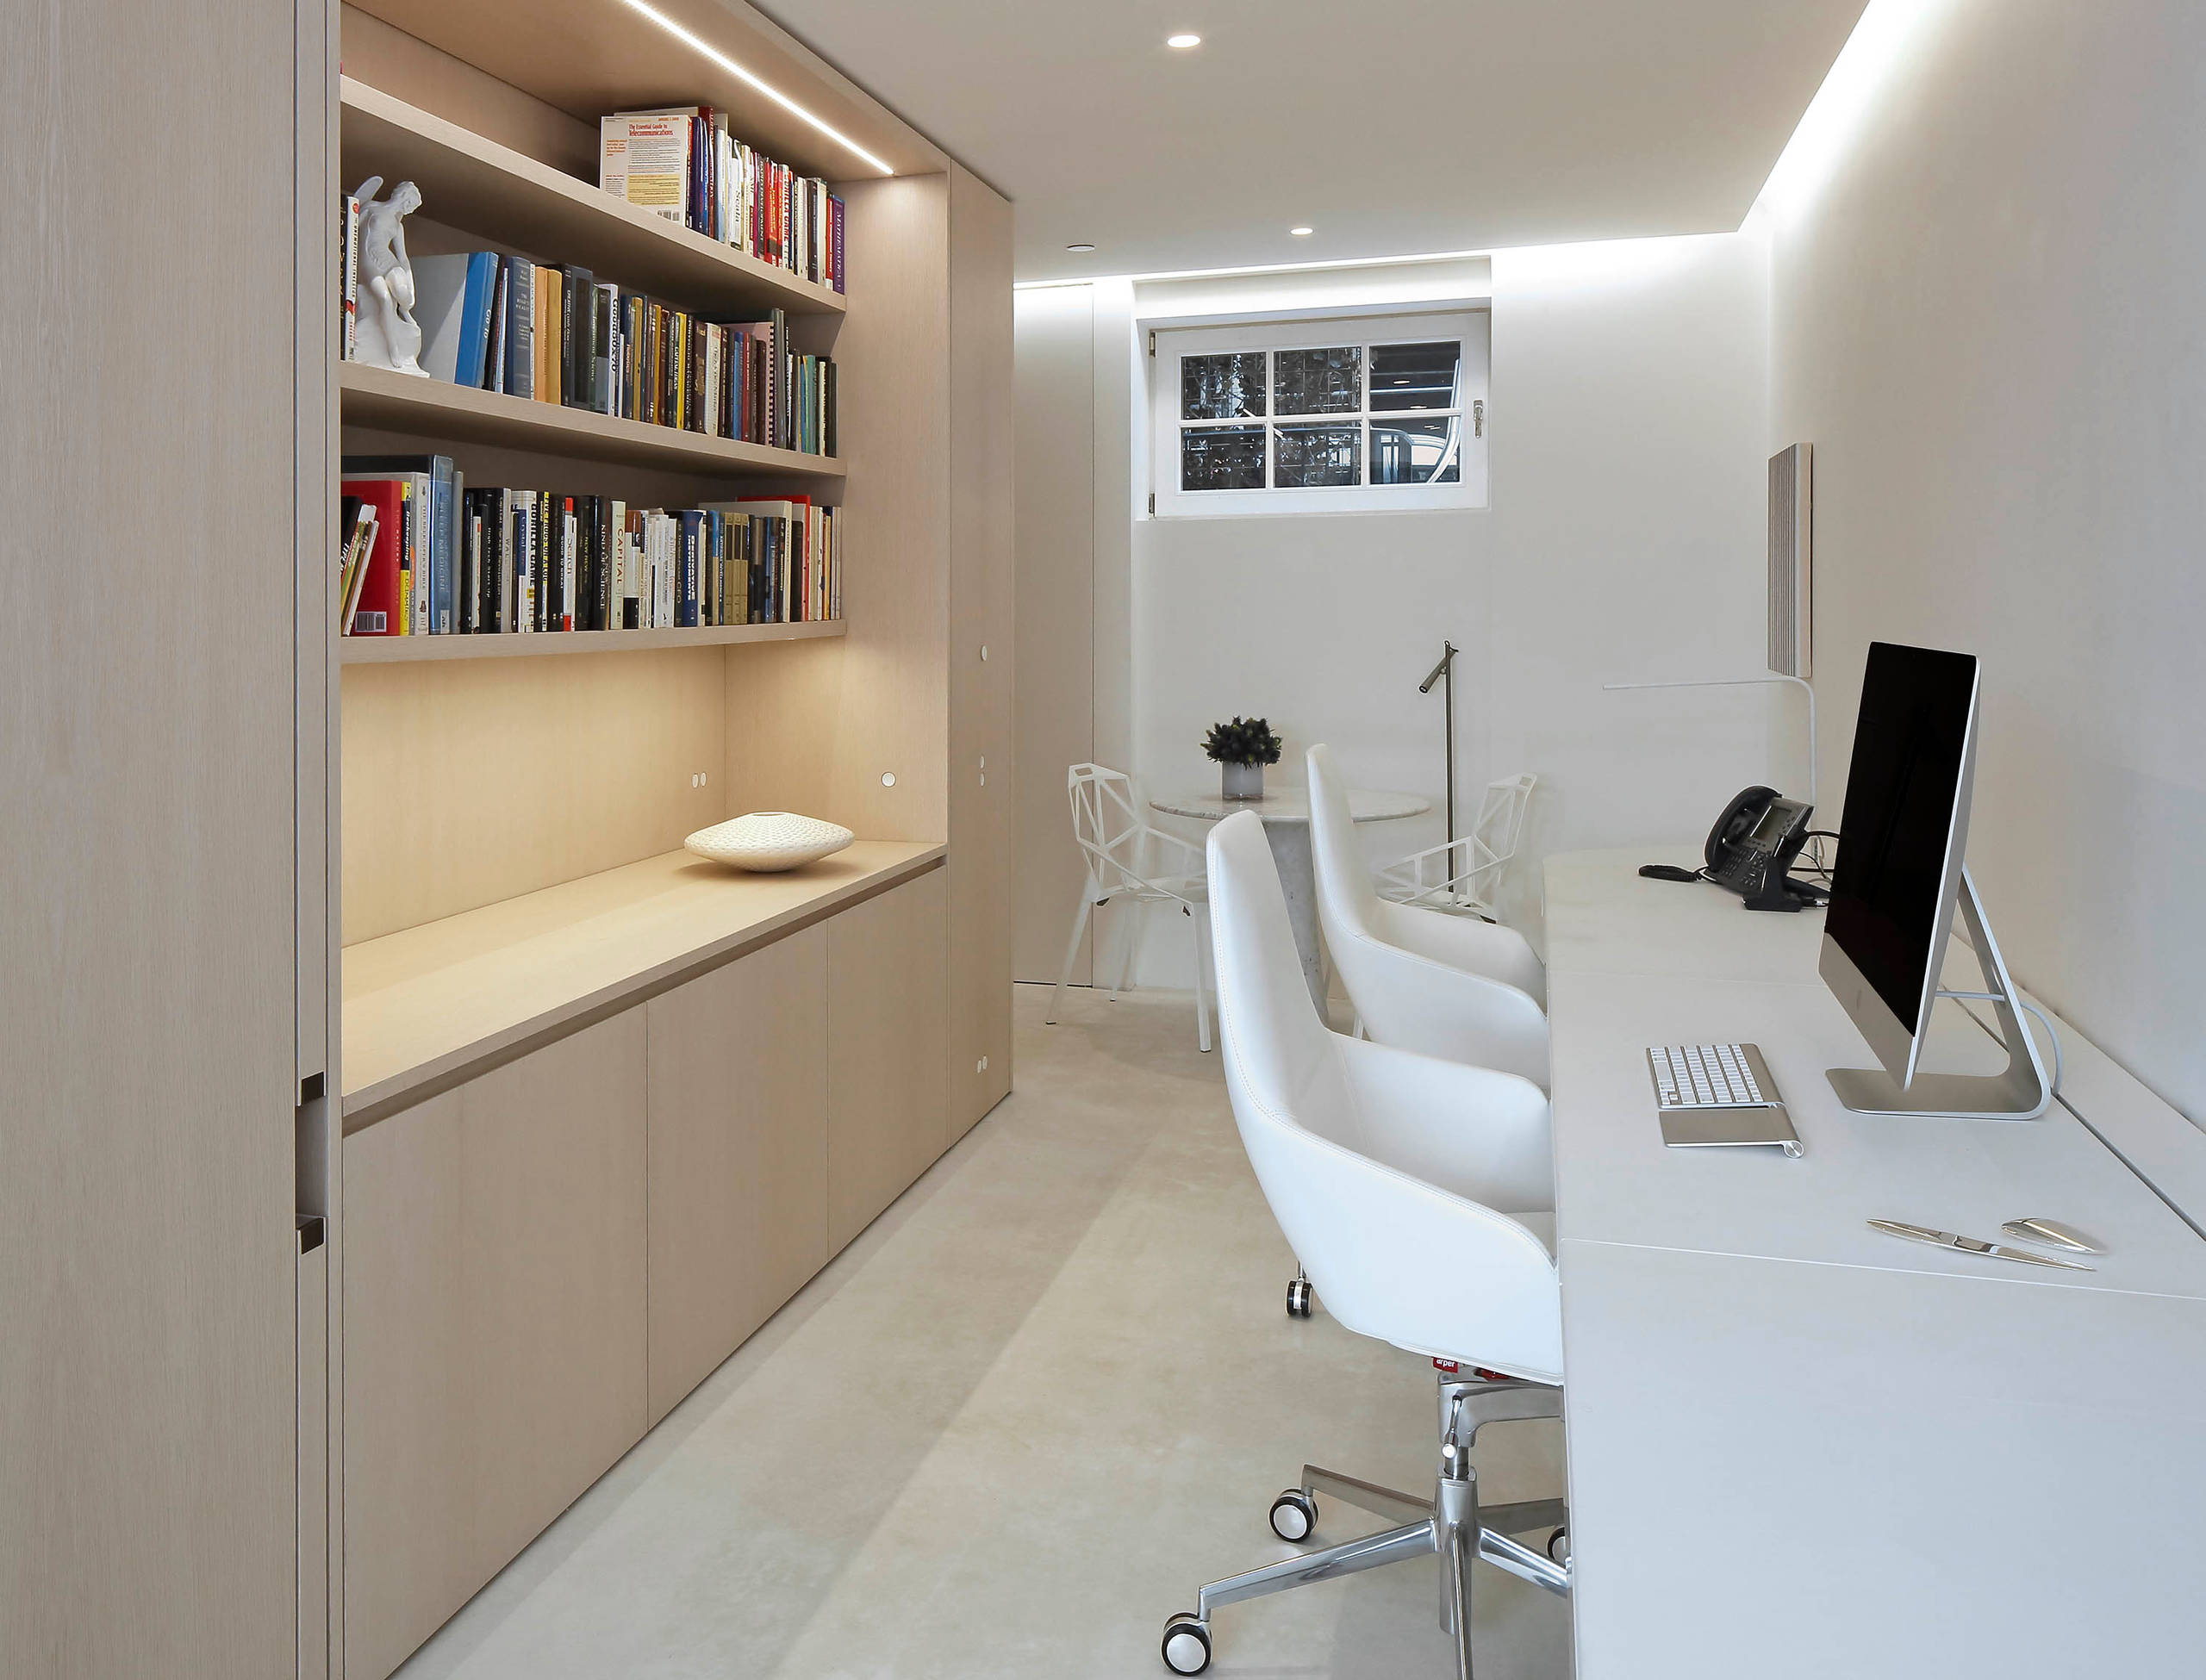 16 Stimulating Modern Home Office Designs That Will Boost ...